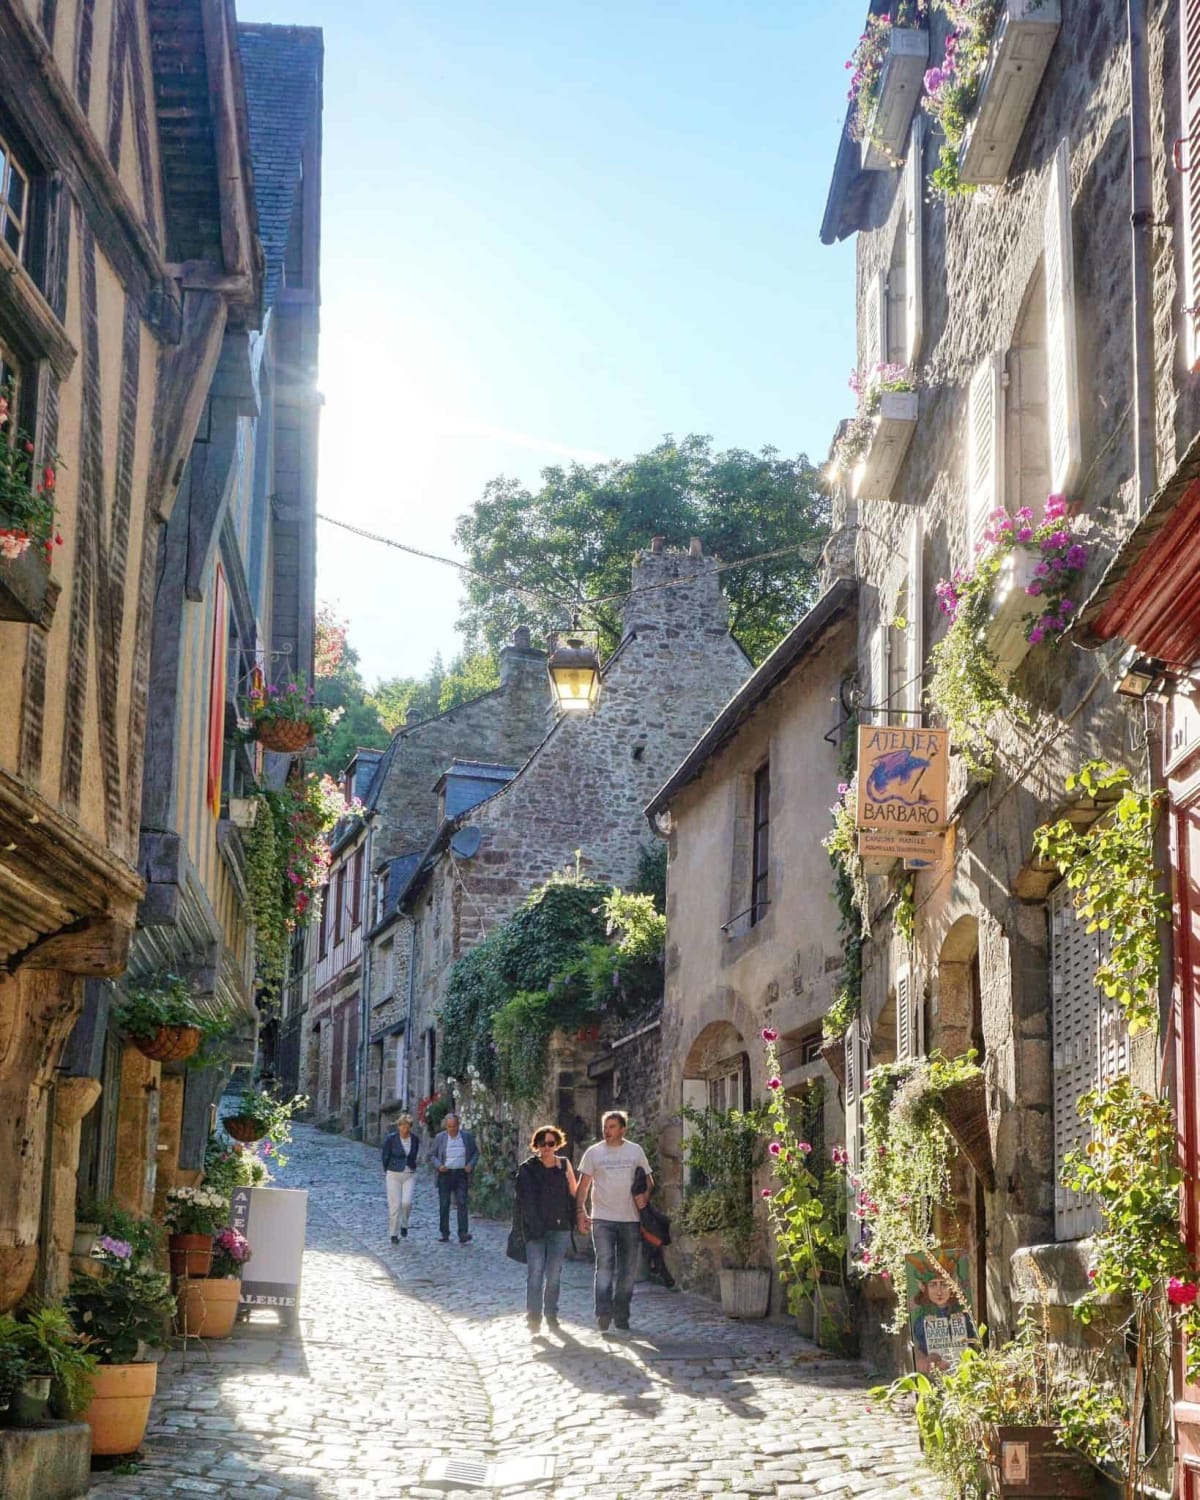 Dinan, a charming town in France, known for its medieval ramparts, cobblestone streets and half-timbered houses.